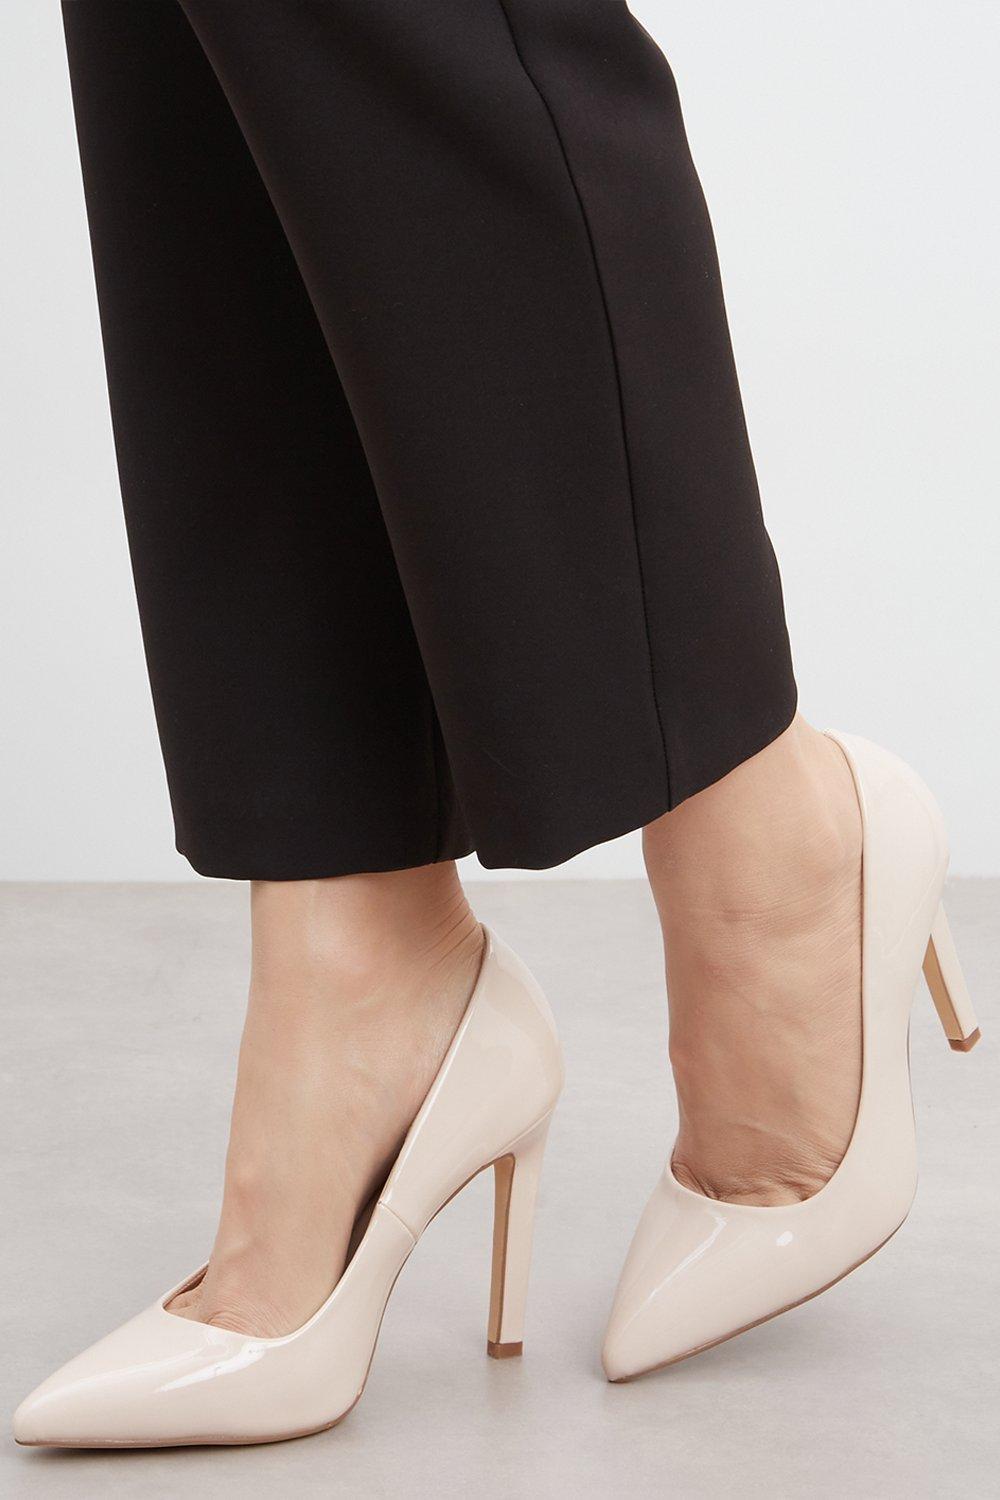 Womens Principles: Cara Pointed Court Shoes